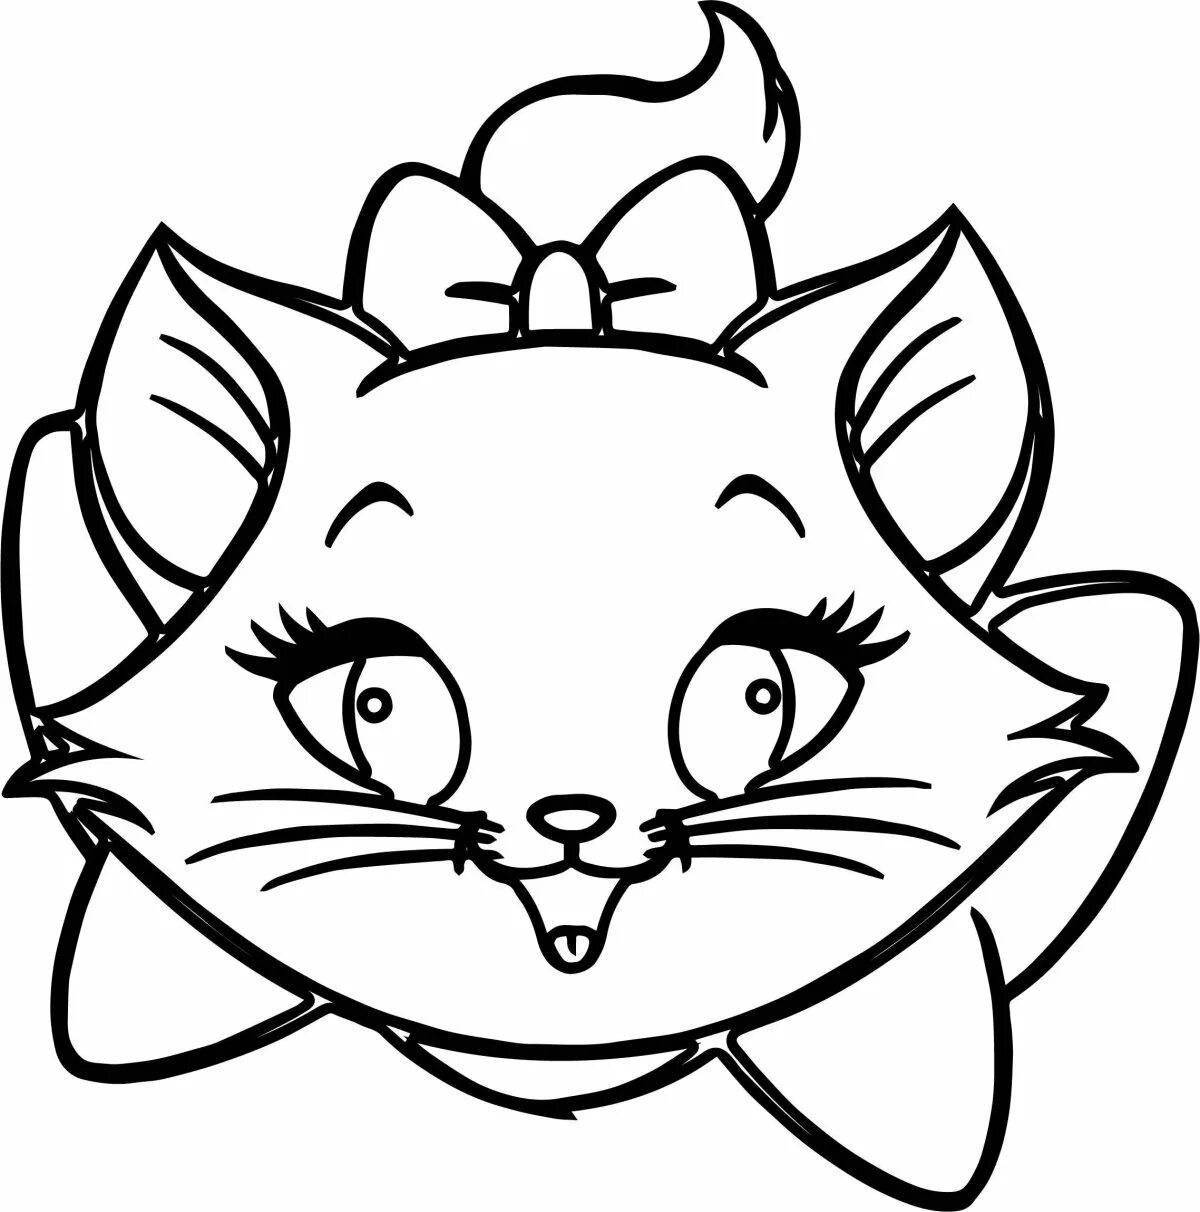 Adorable cat face coloring book